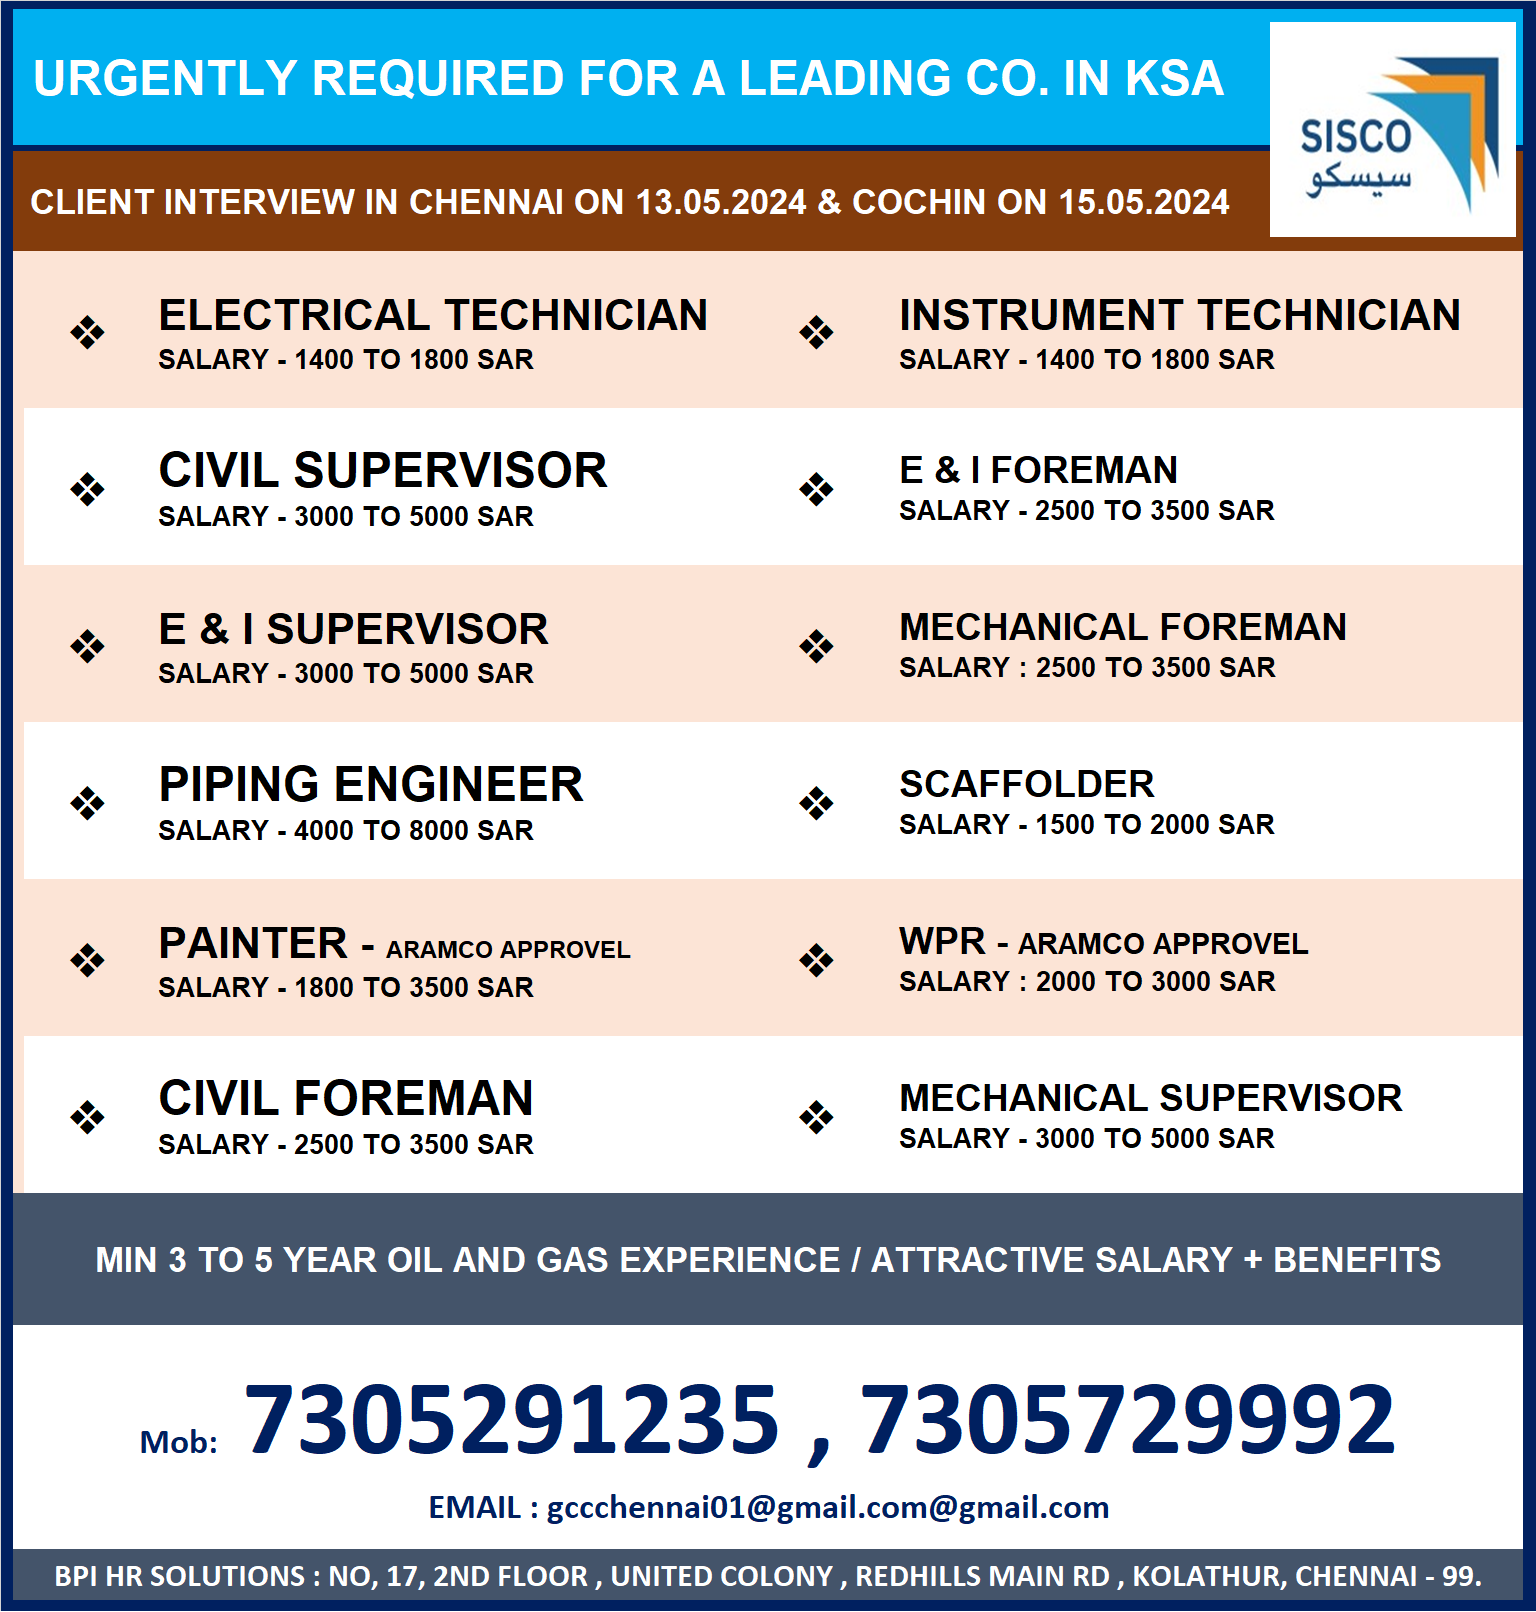 URGNELTY REQUIRED FOR A LEADING CO. IN KSA